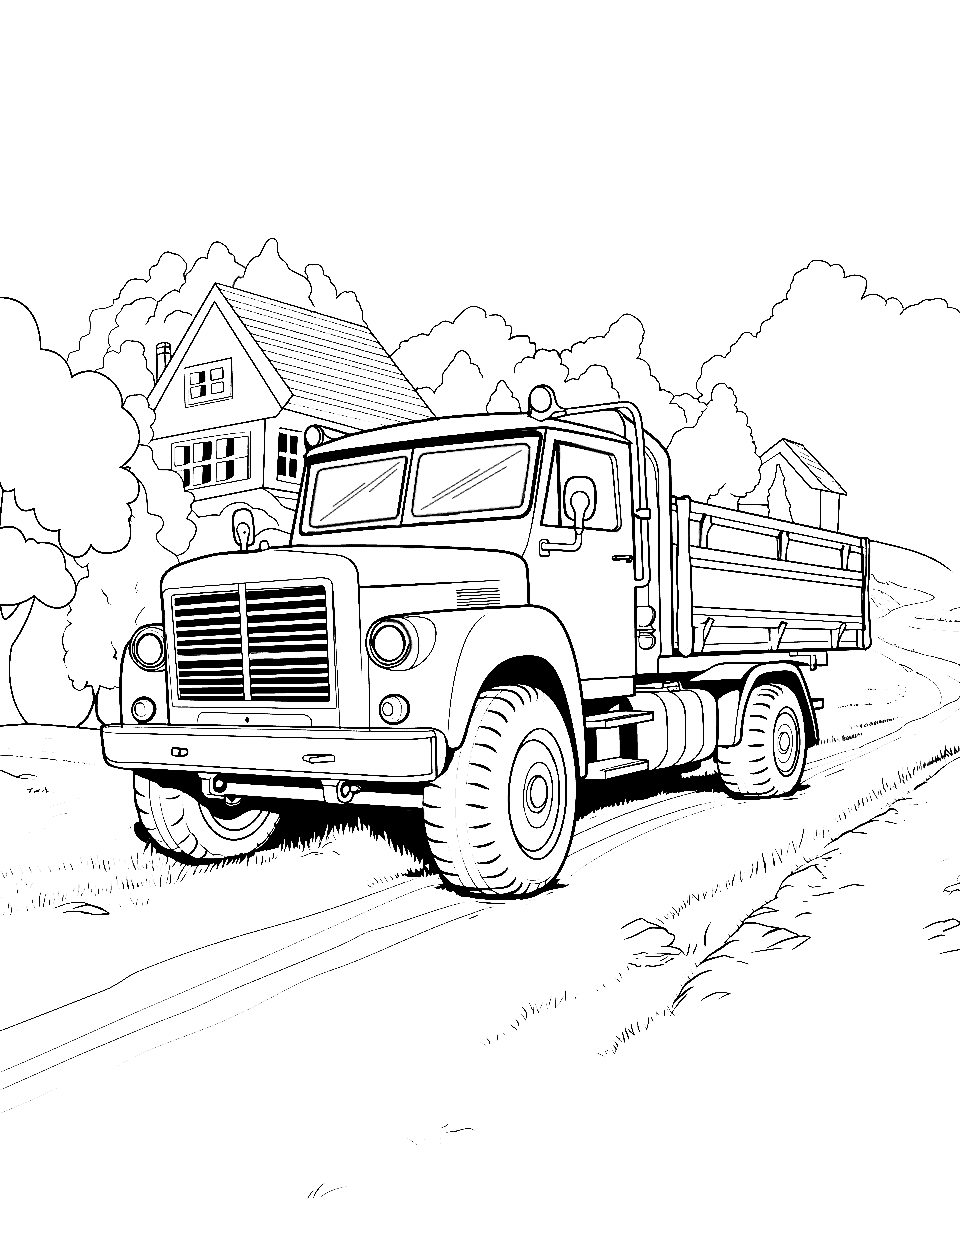 Army Truck on Patrol Coloring Page - An army truck driving through a peaceful village.